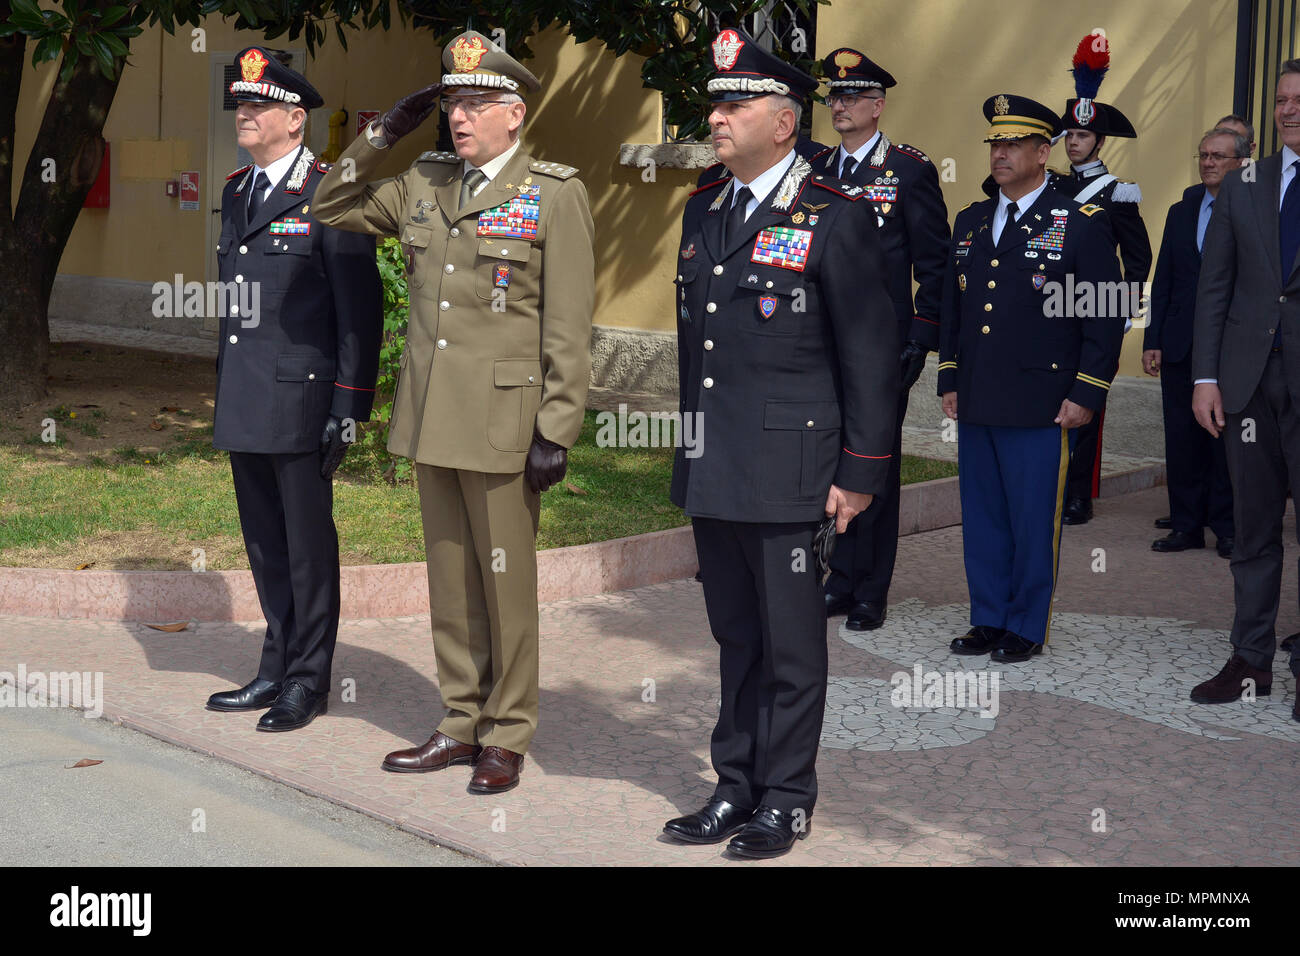 Gen. Tullio Del Sette, Italian Carabinieri General Commander (left), Gen. Claudio Graziano, Italian Army Chief of Staff (center) and Brig. Gen. Giovanni Pietro Barbano, Center of Excellence for Stability Police Units (CoESPU) director (left), receive salute of honor at the end of visit at Center of Excellence for Stability Police Units (CoESPU) Vicenza, Italy, April 1, 2017. (U.S. Army Photo by Visual Information Specialist Antonio Bedin/released) Stock Photo